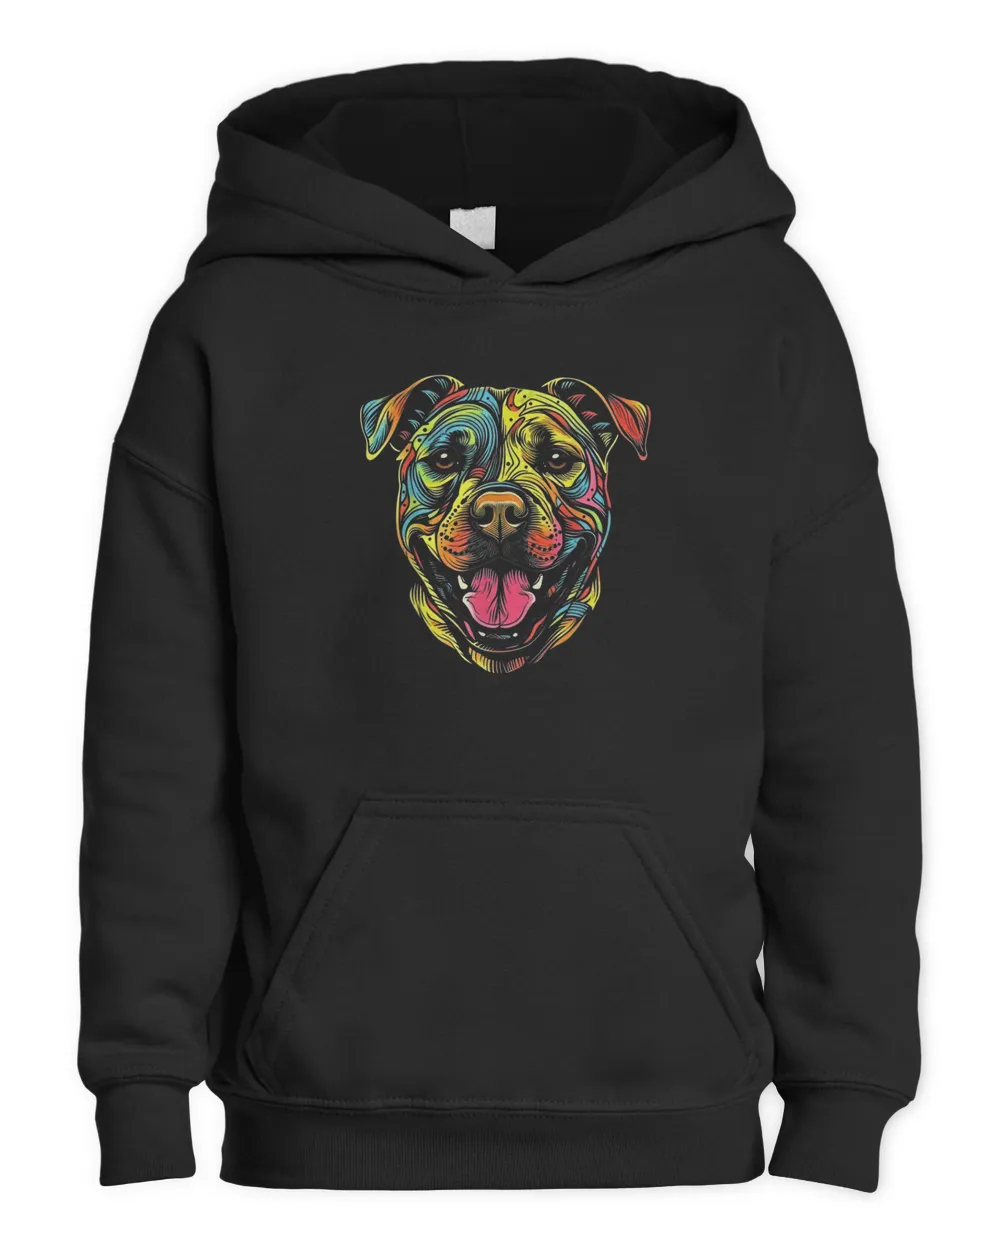 Pit Bull Mom Dog Lover Colorful Artistic